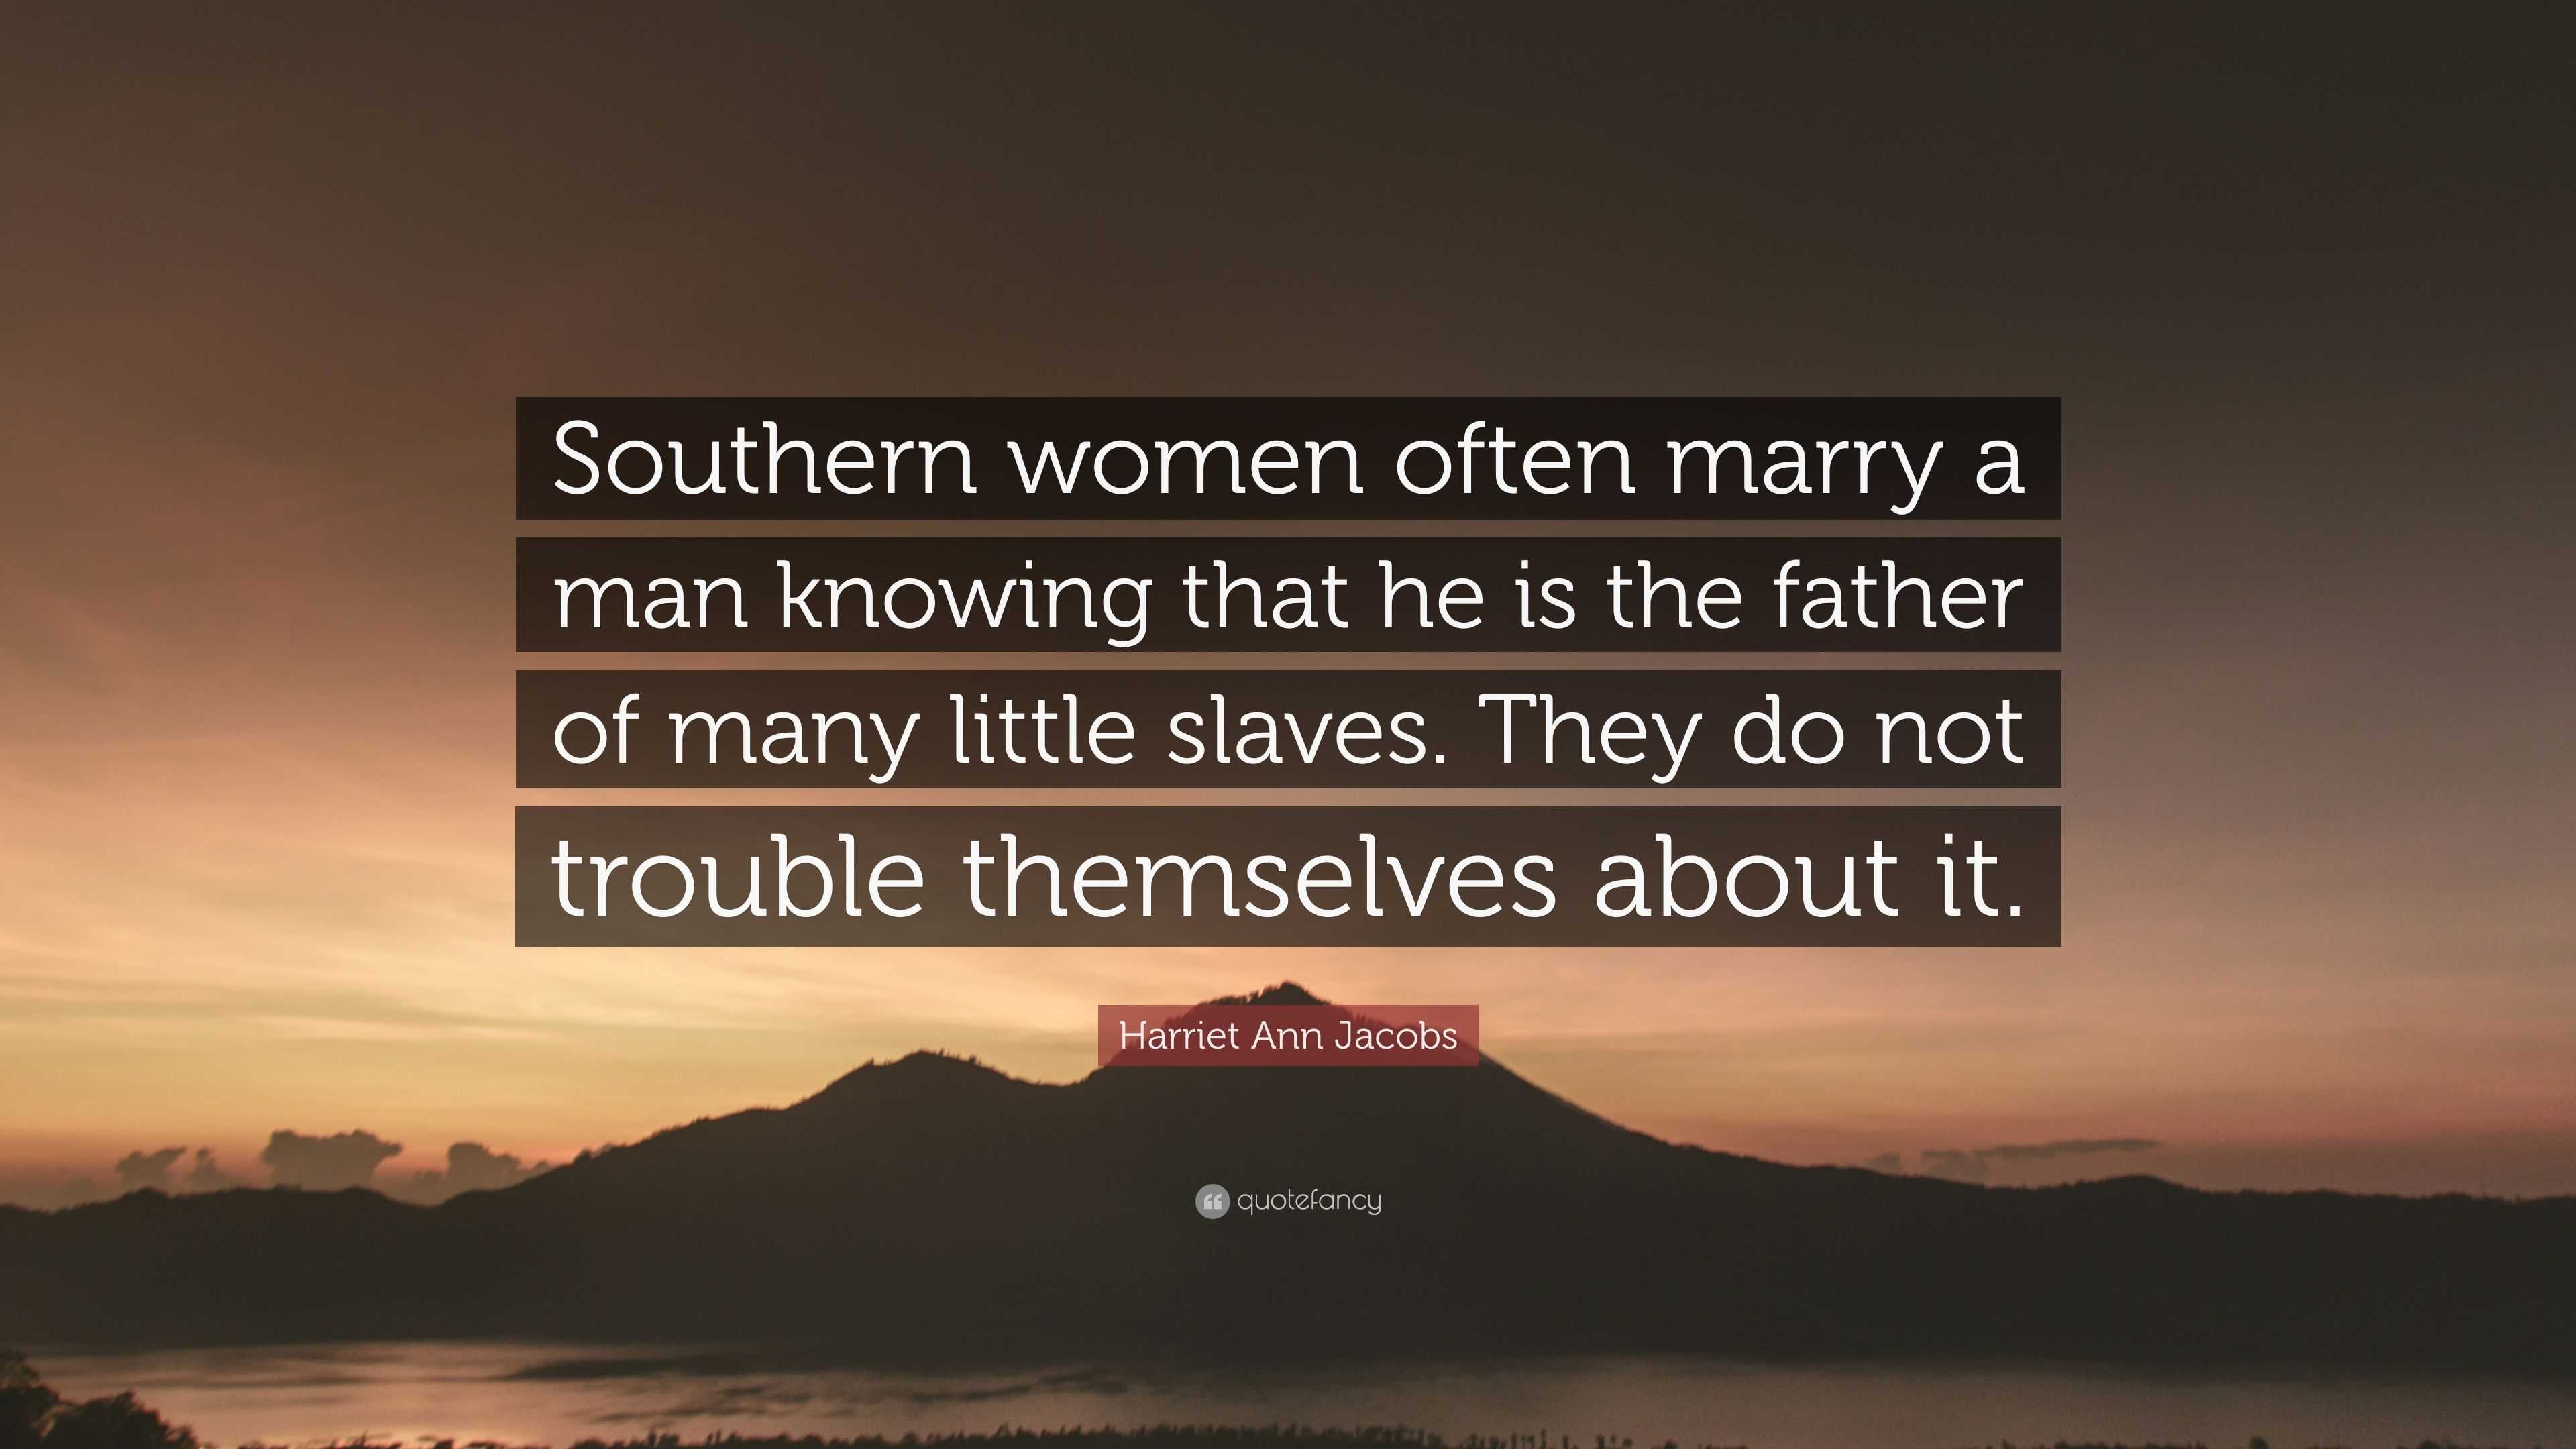 Harriet Ann Jacobs Quote: “Southern women often marry a man knowing